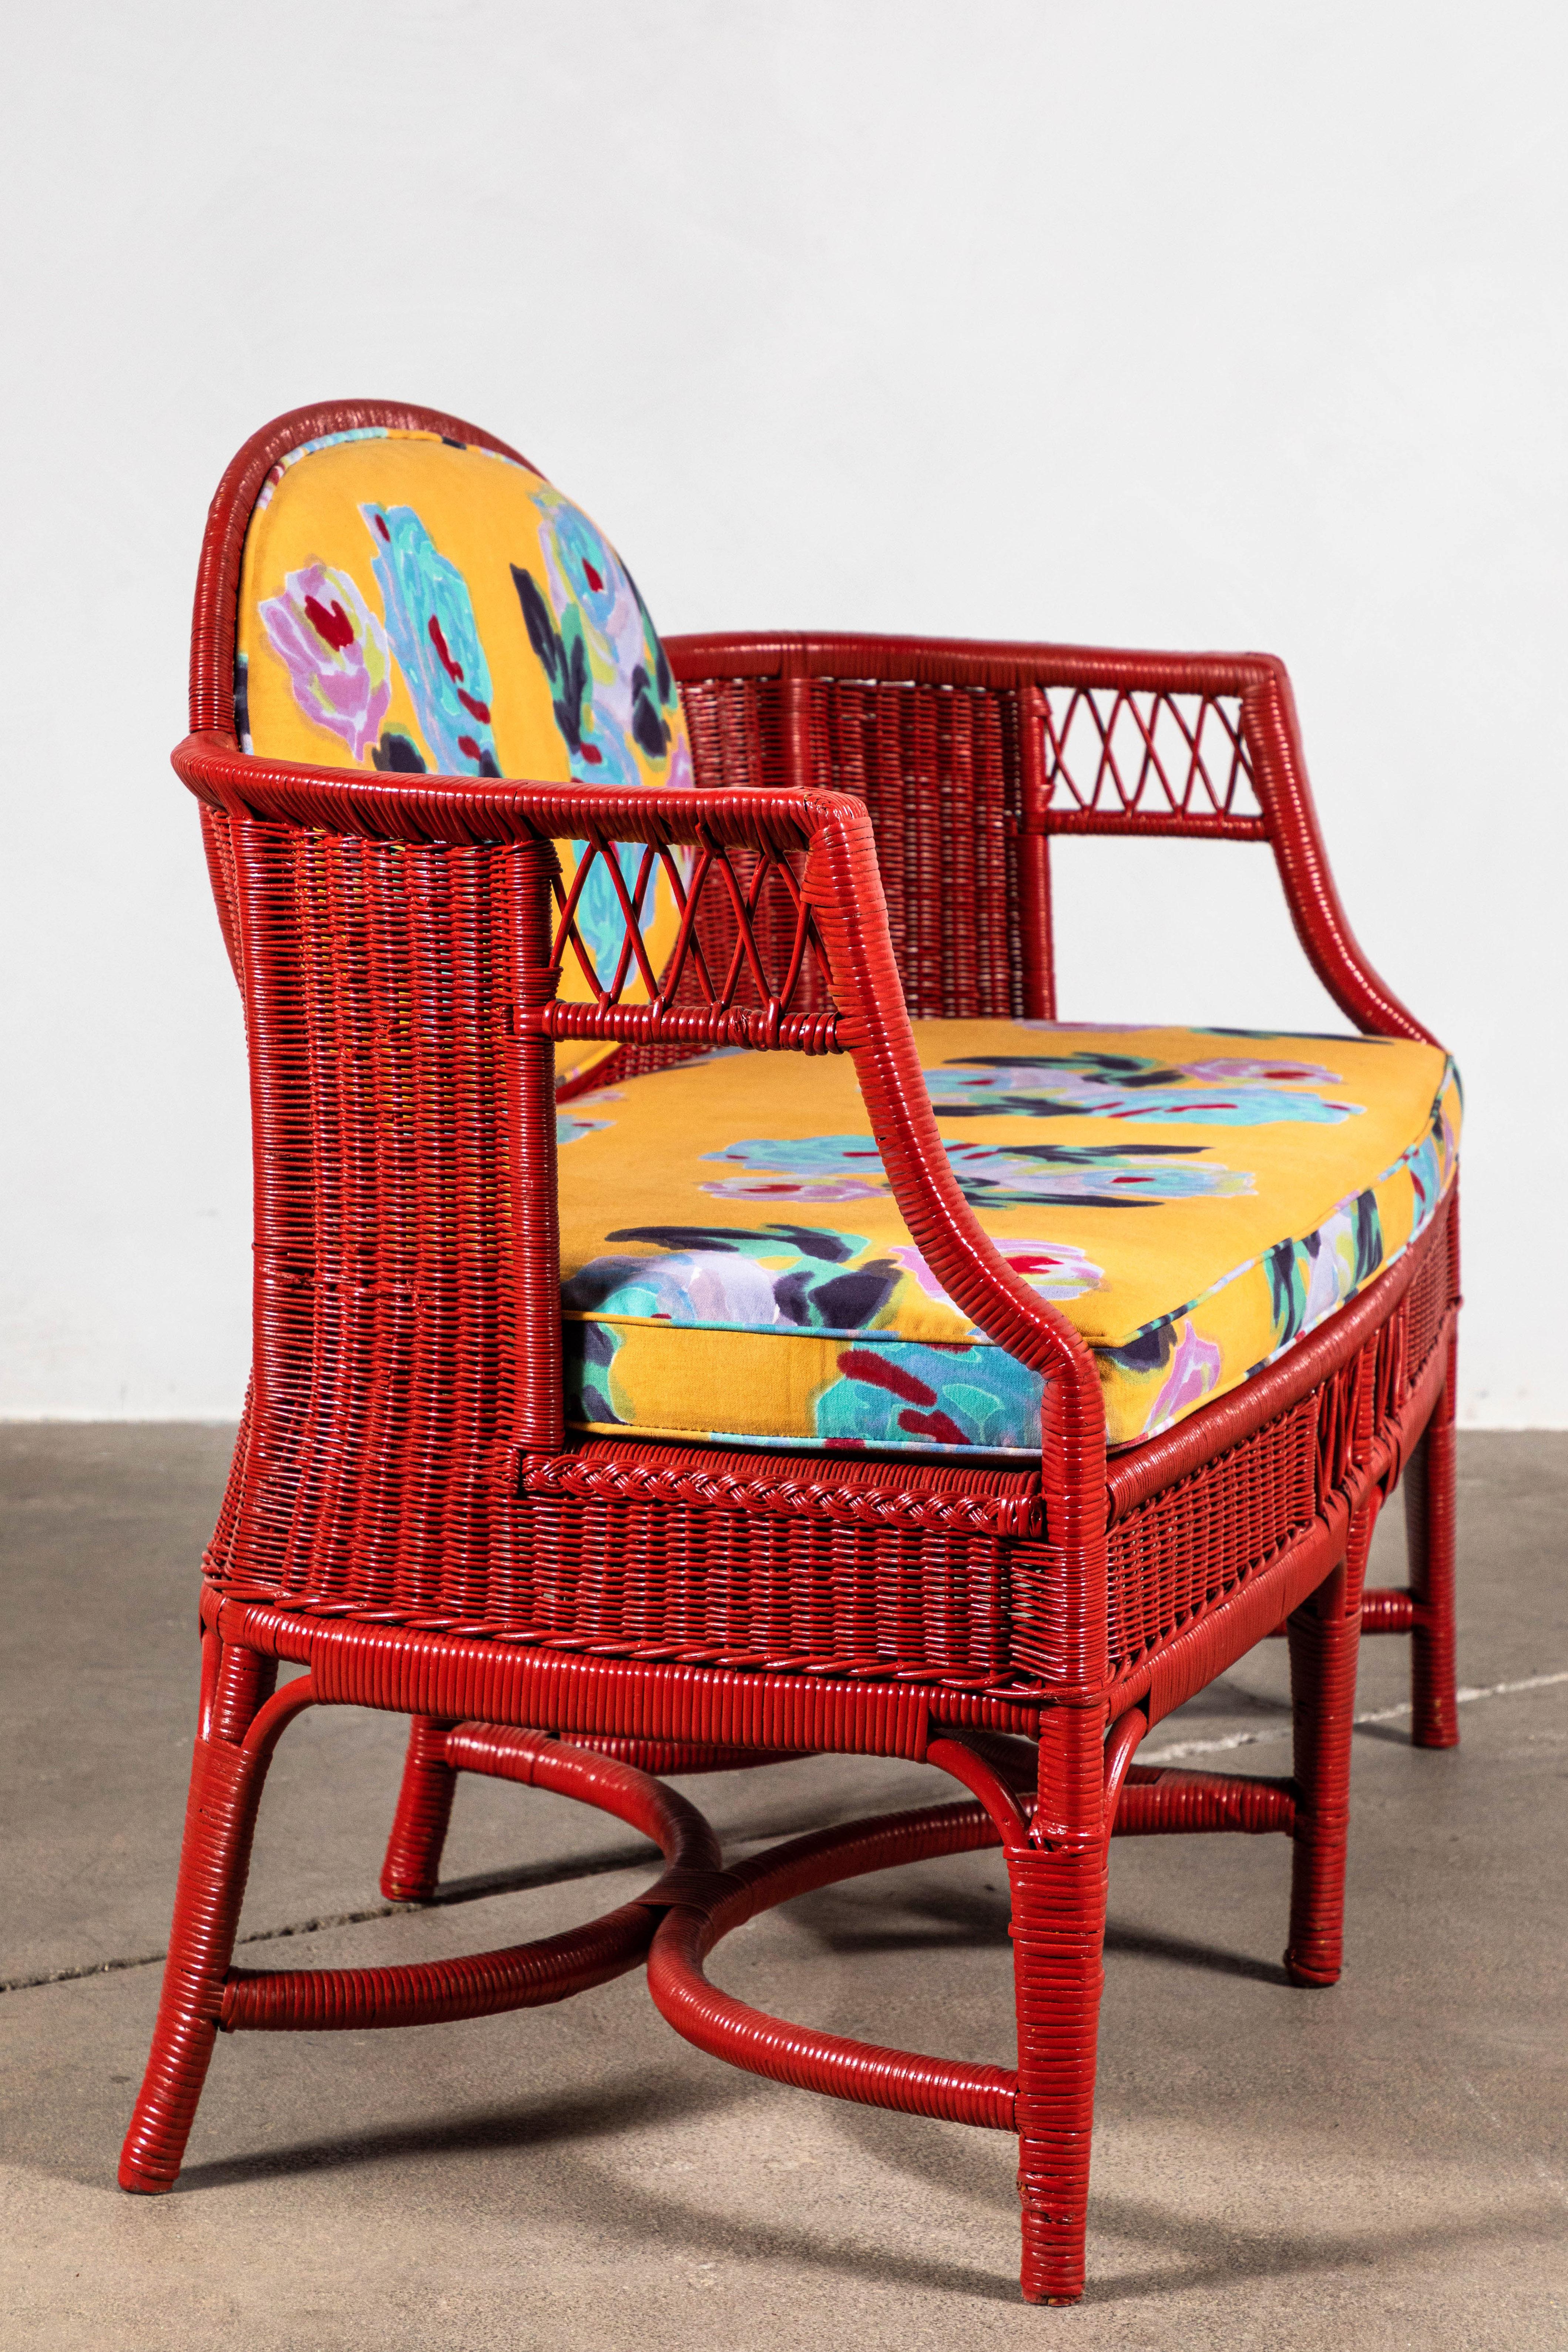 Mid-20th Century French Red Wicker Settee in Lisa Corti Floral Fabric